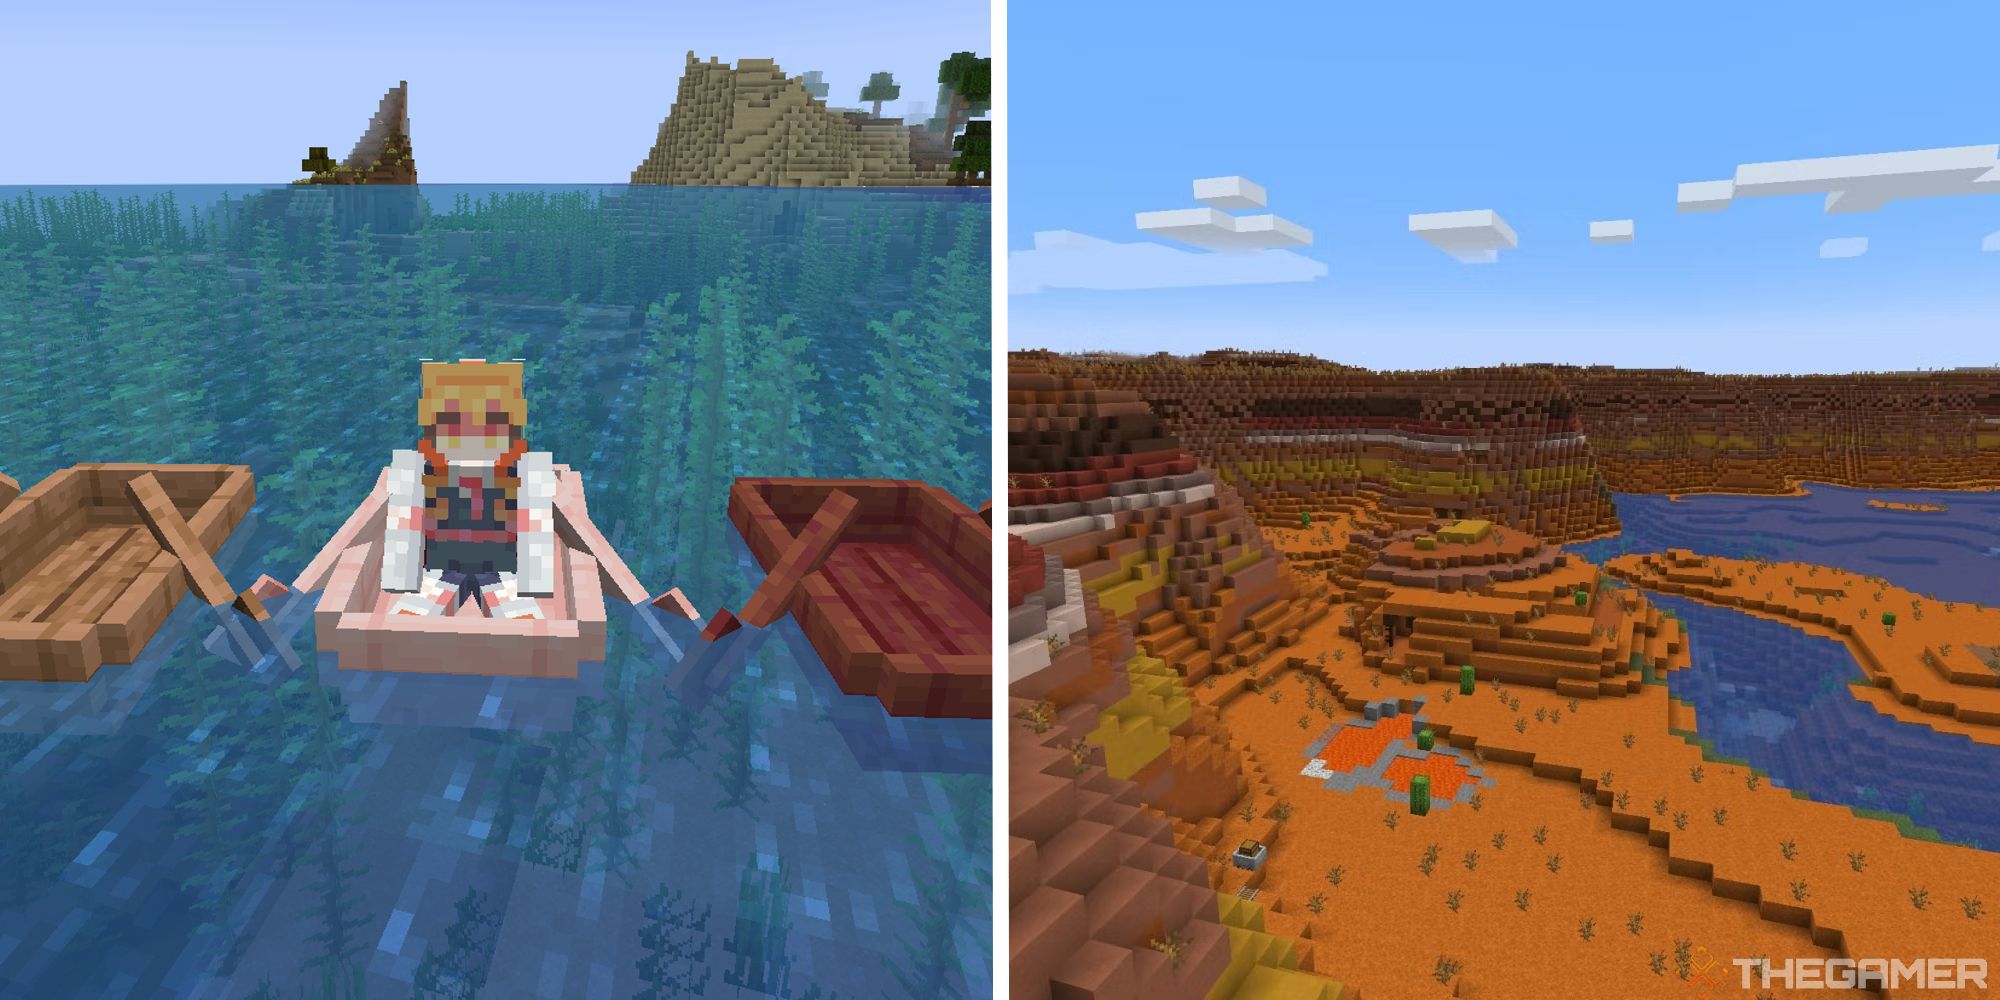 split image showing player in boat next to image of badlands biome